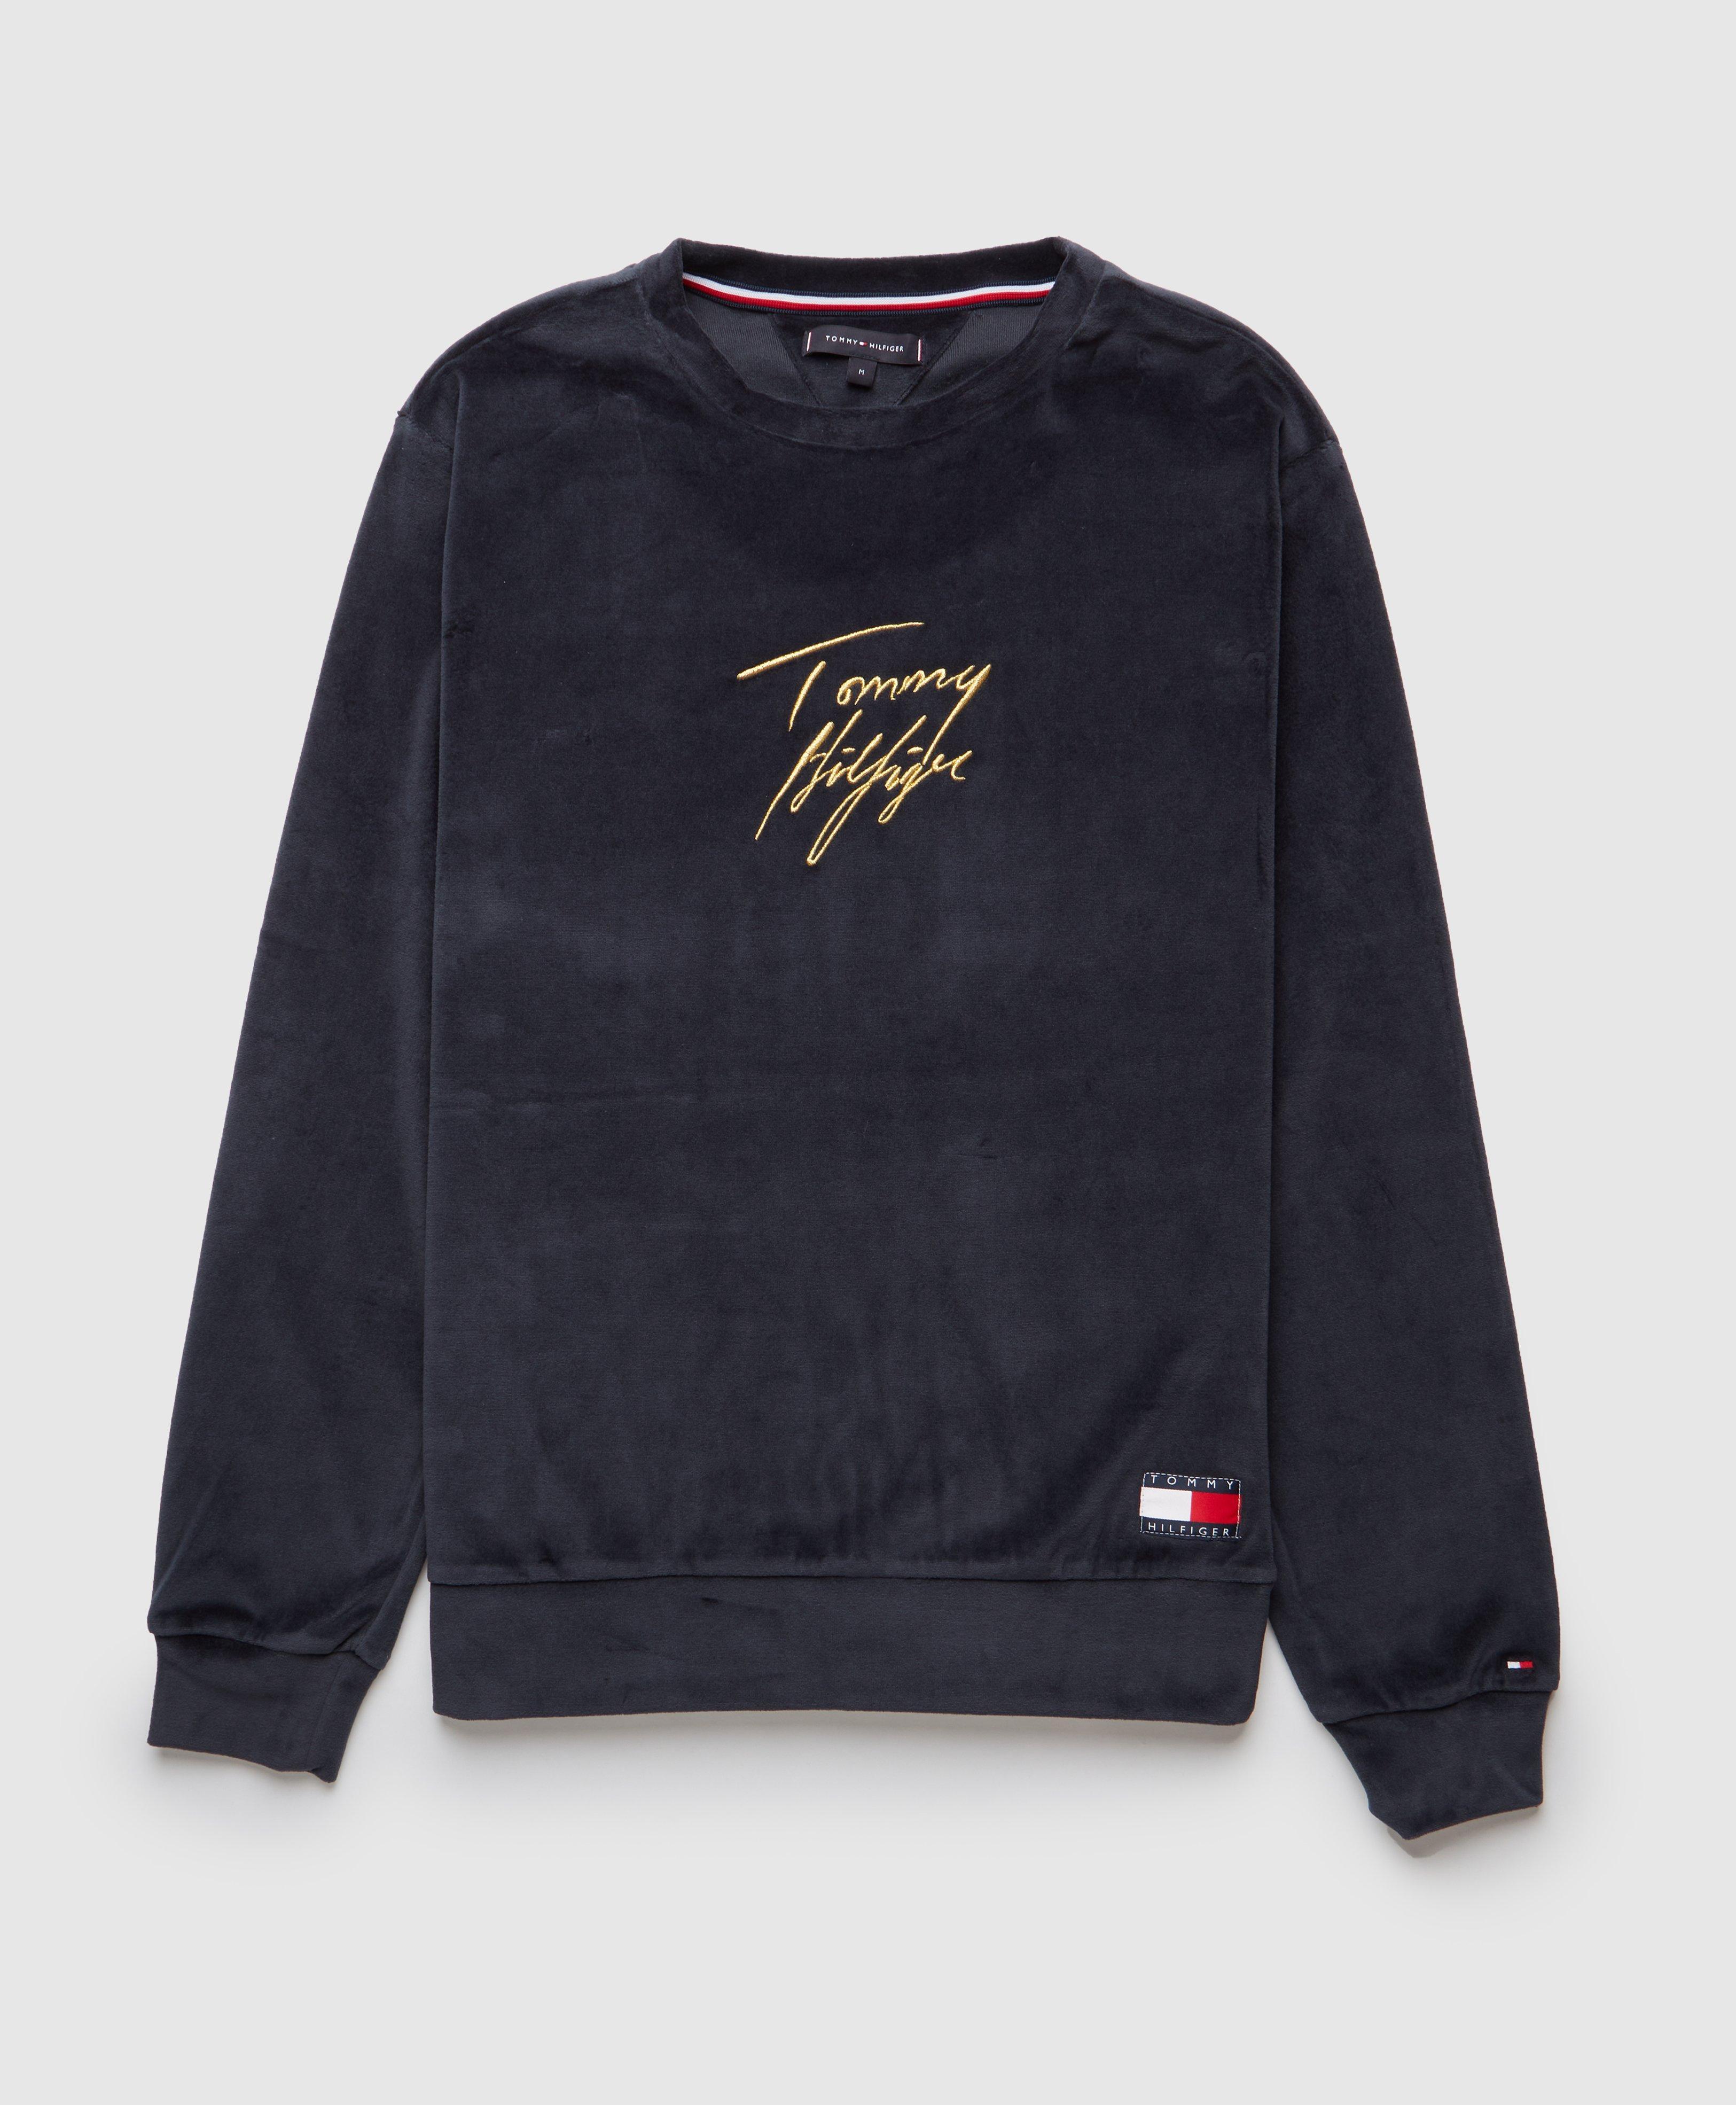 Tommy Hilfiger dark gray chenille collared sweatshirt with small embroidered logo softest velvet fabric